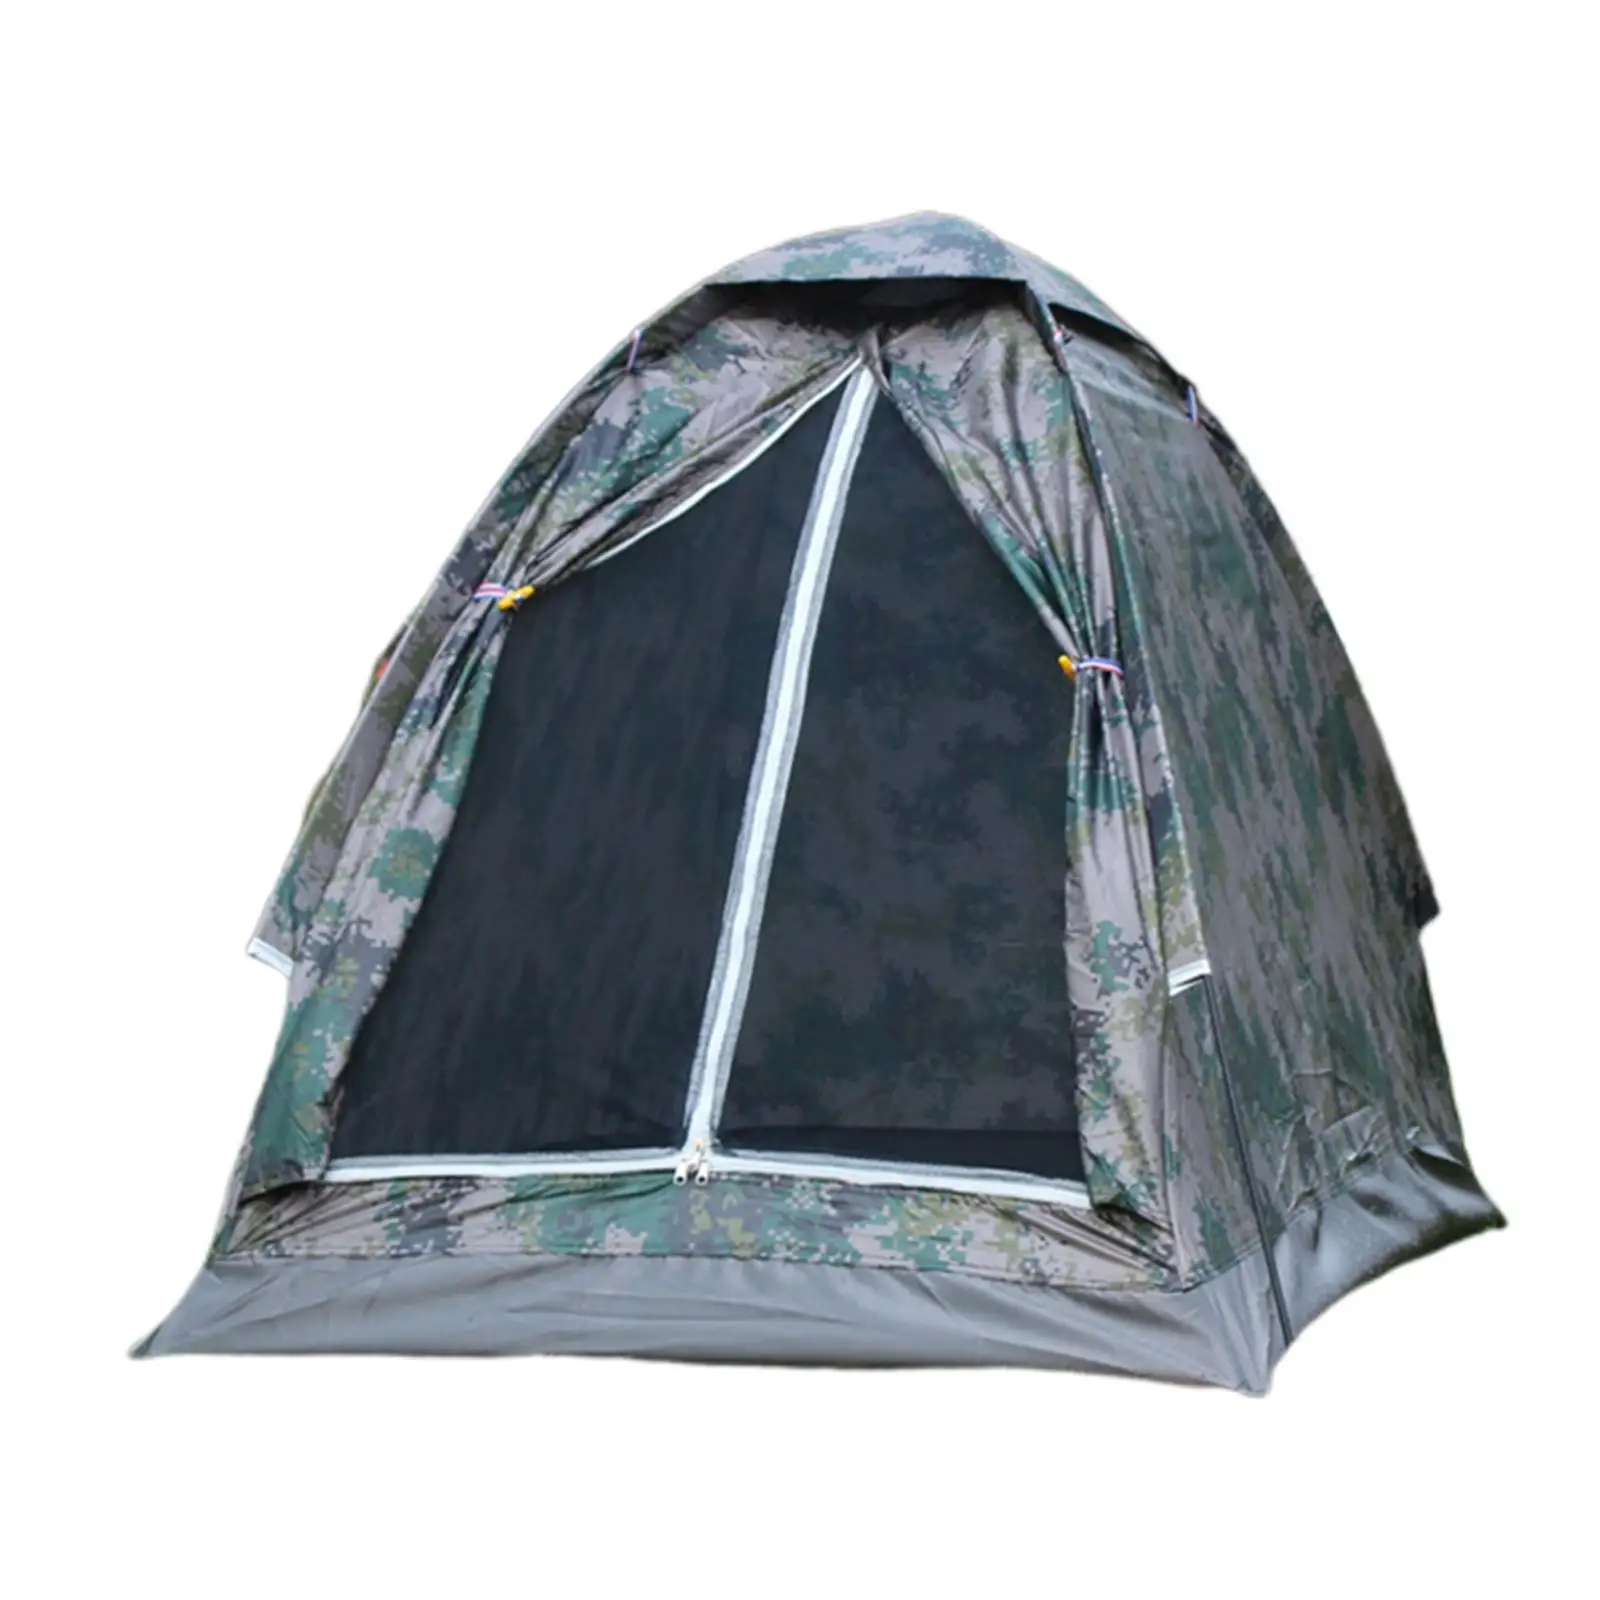 One to Two Person Camping Tent Beach Tent Single Layer Tent Portable Camouflage Outdoor Tent for Hiking Traveling